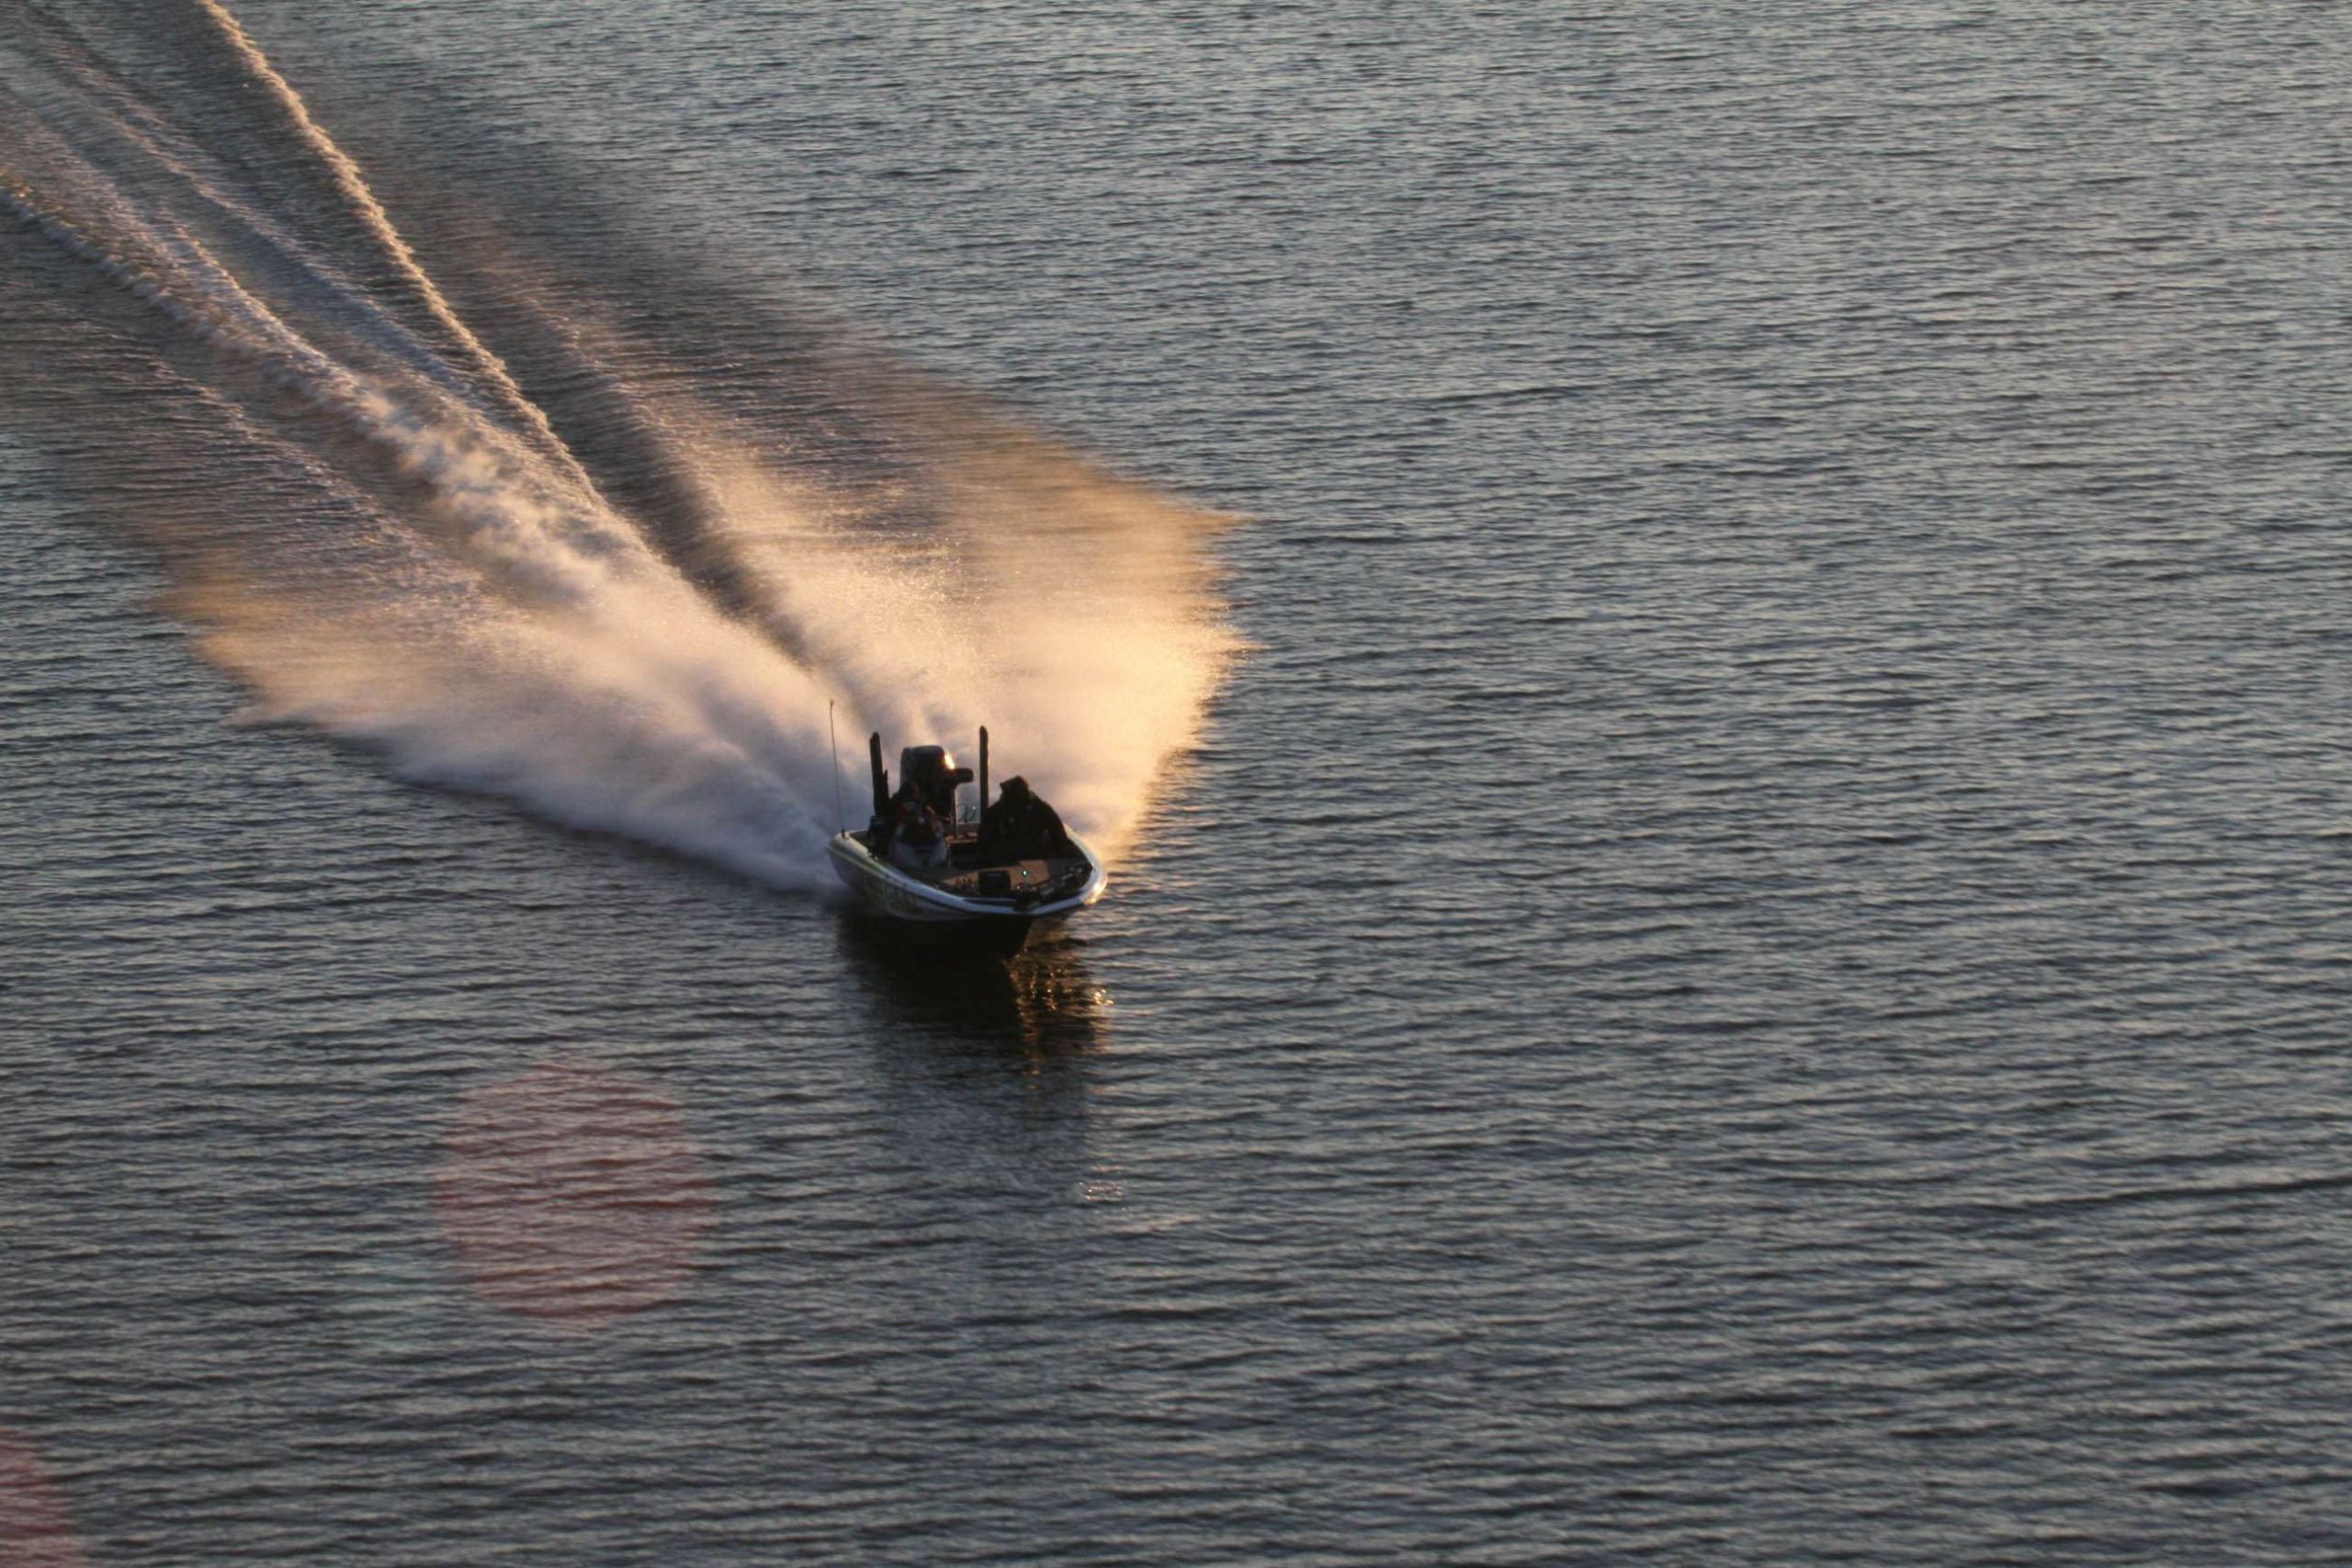 The aerial view of bass boats blasting along Grand Lake was something to behold.